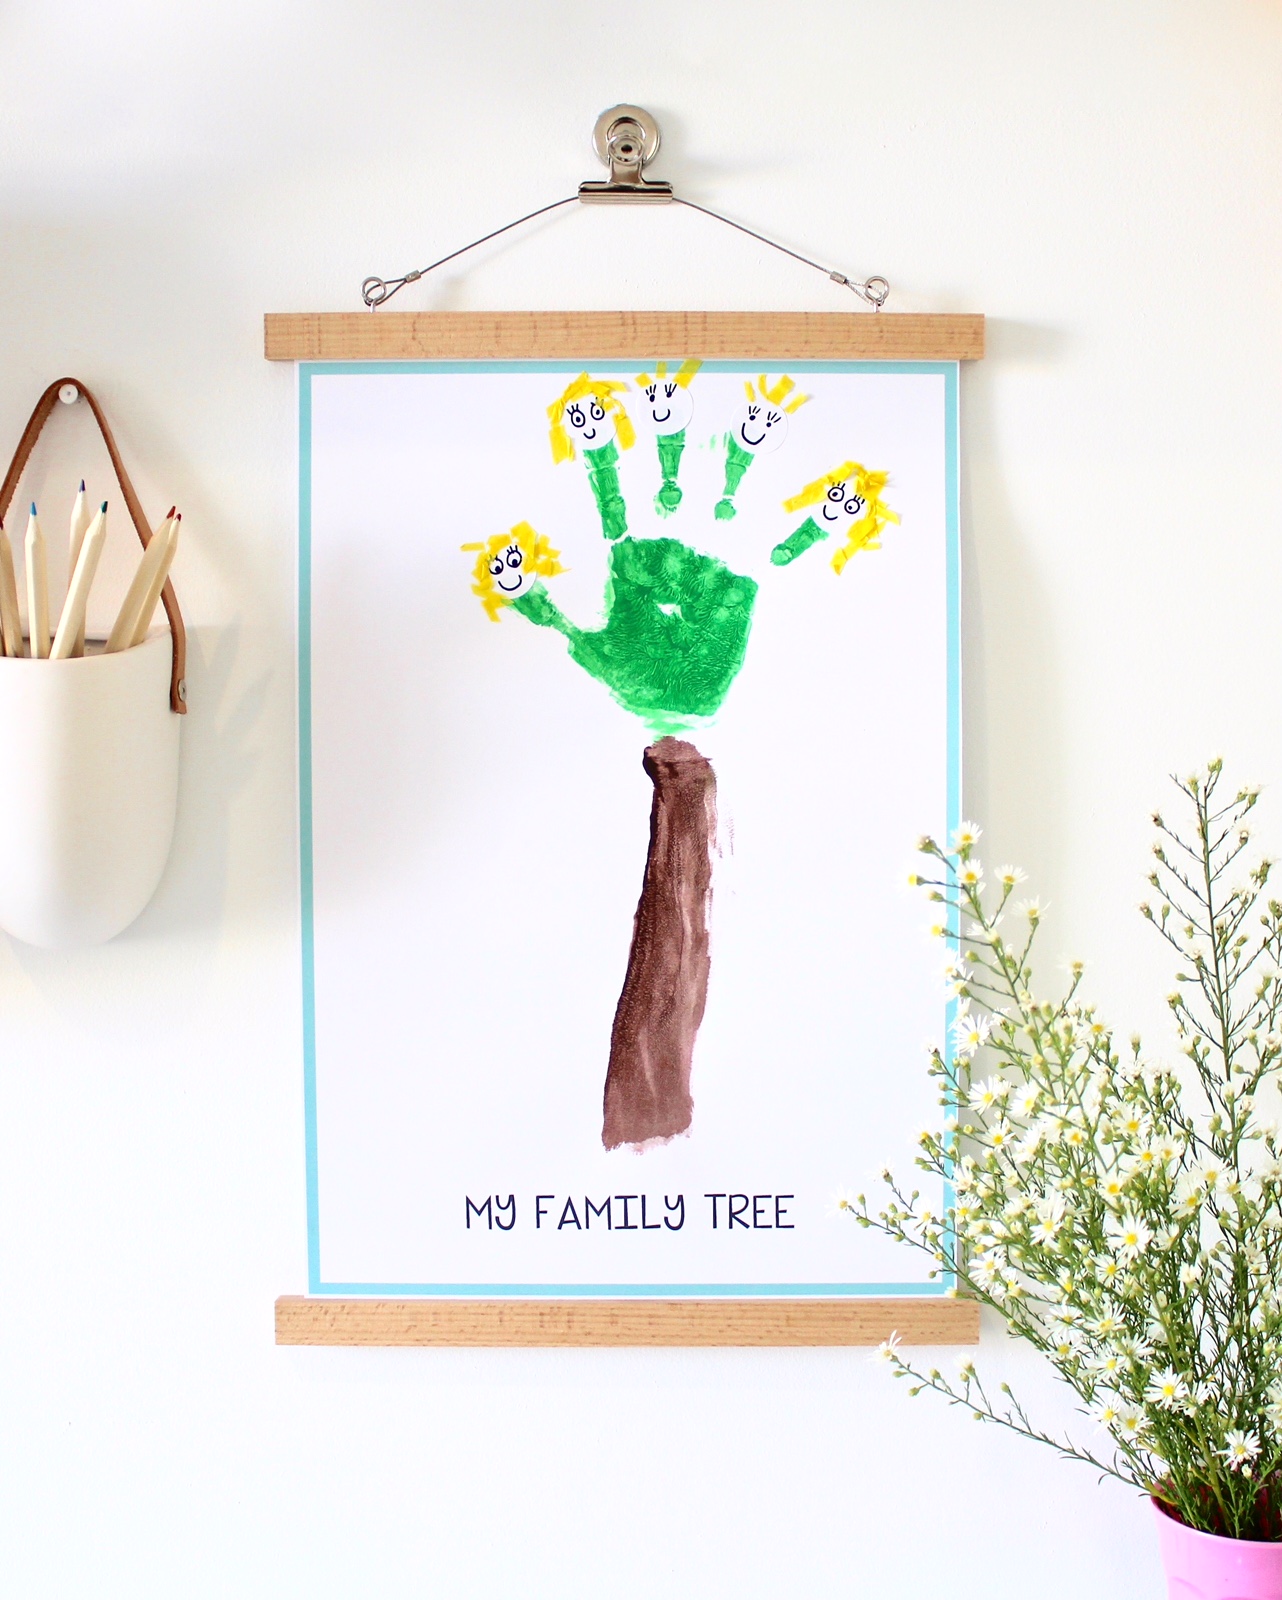 Family Tree Craft Activity Ideas for Kids